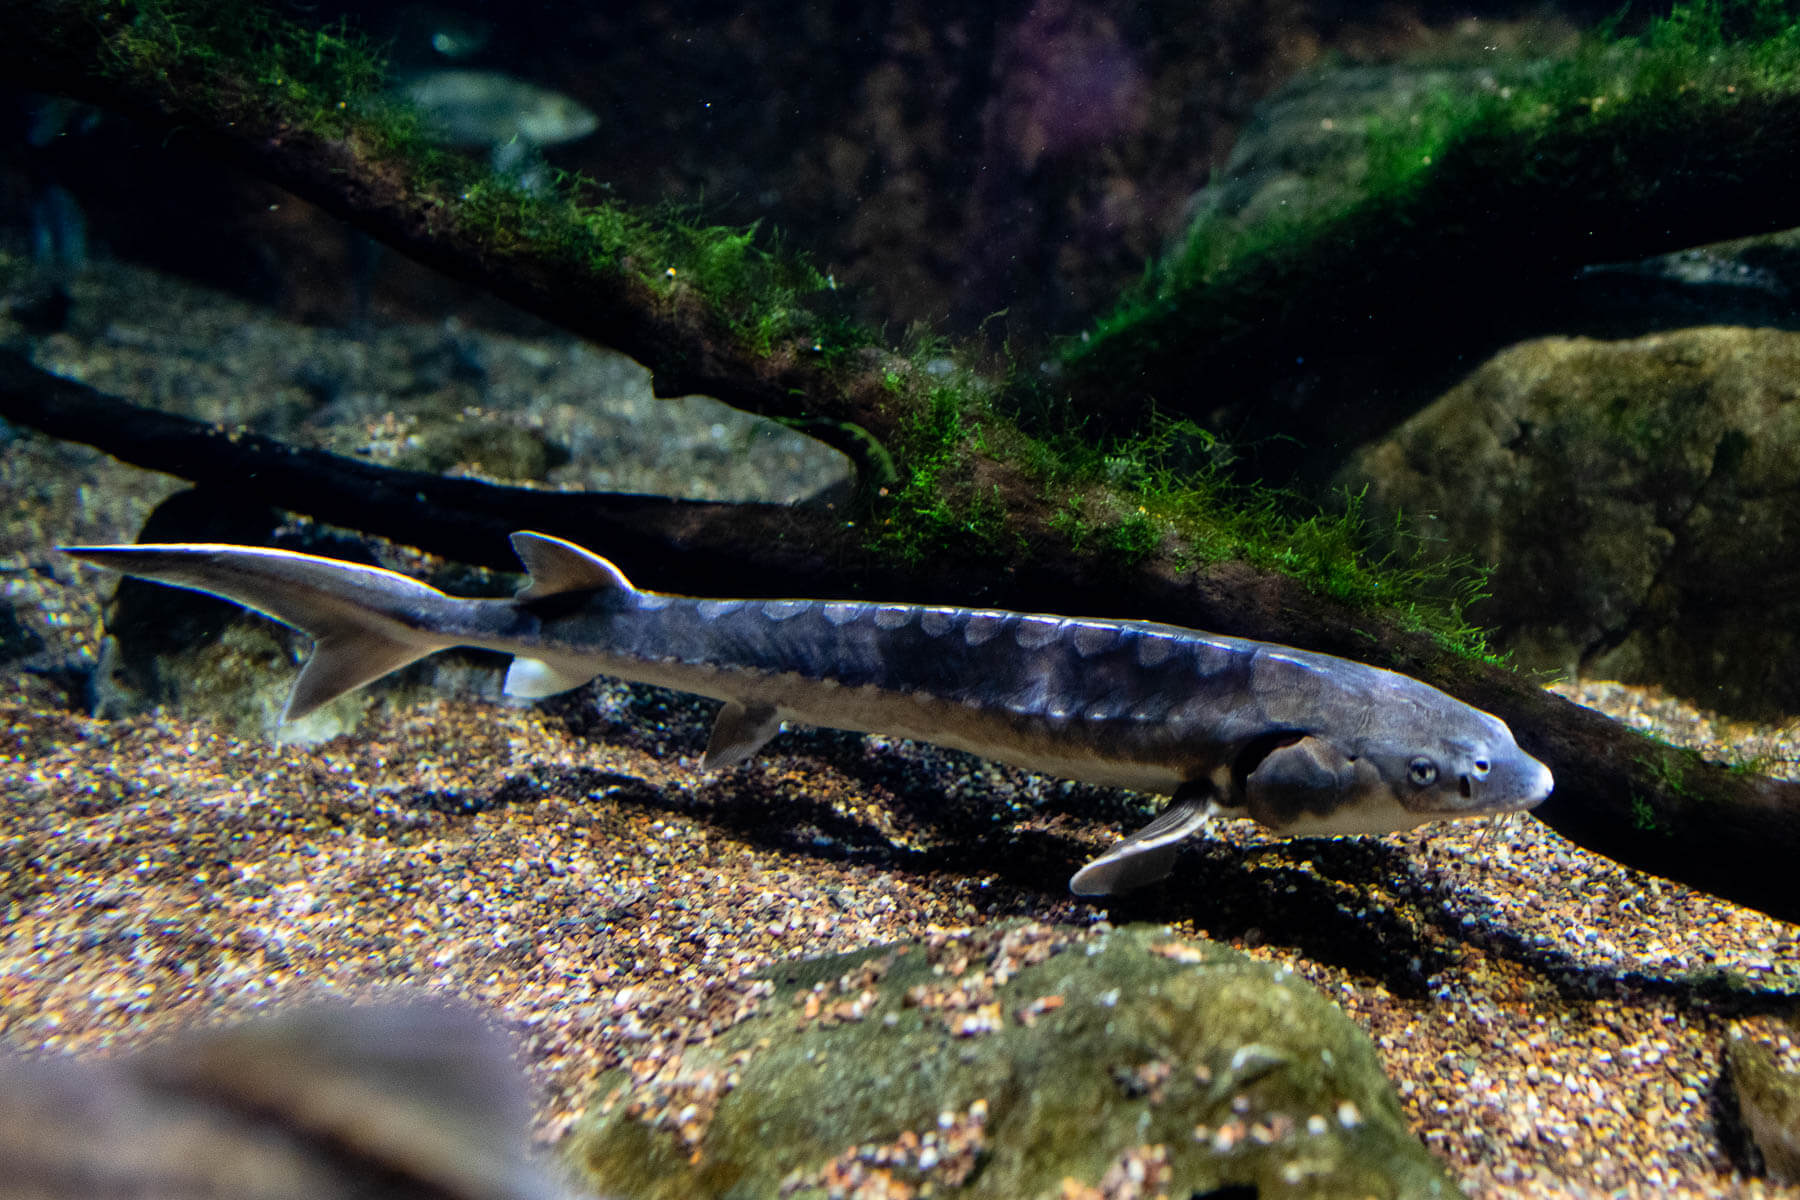 The sturgeon has a brown, tan or bluish-black body and a whitish belly.